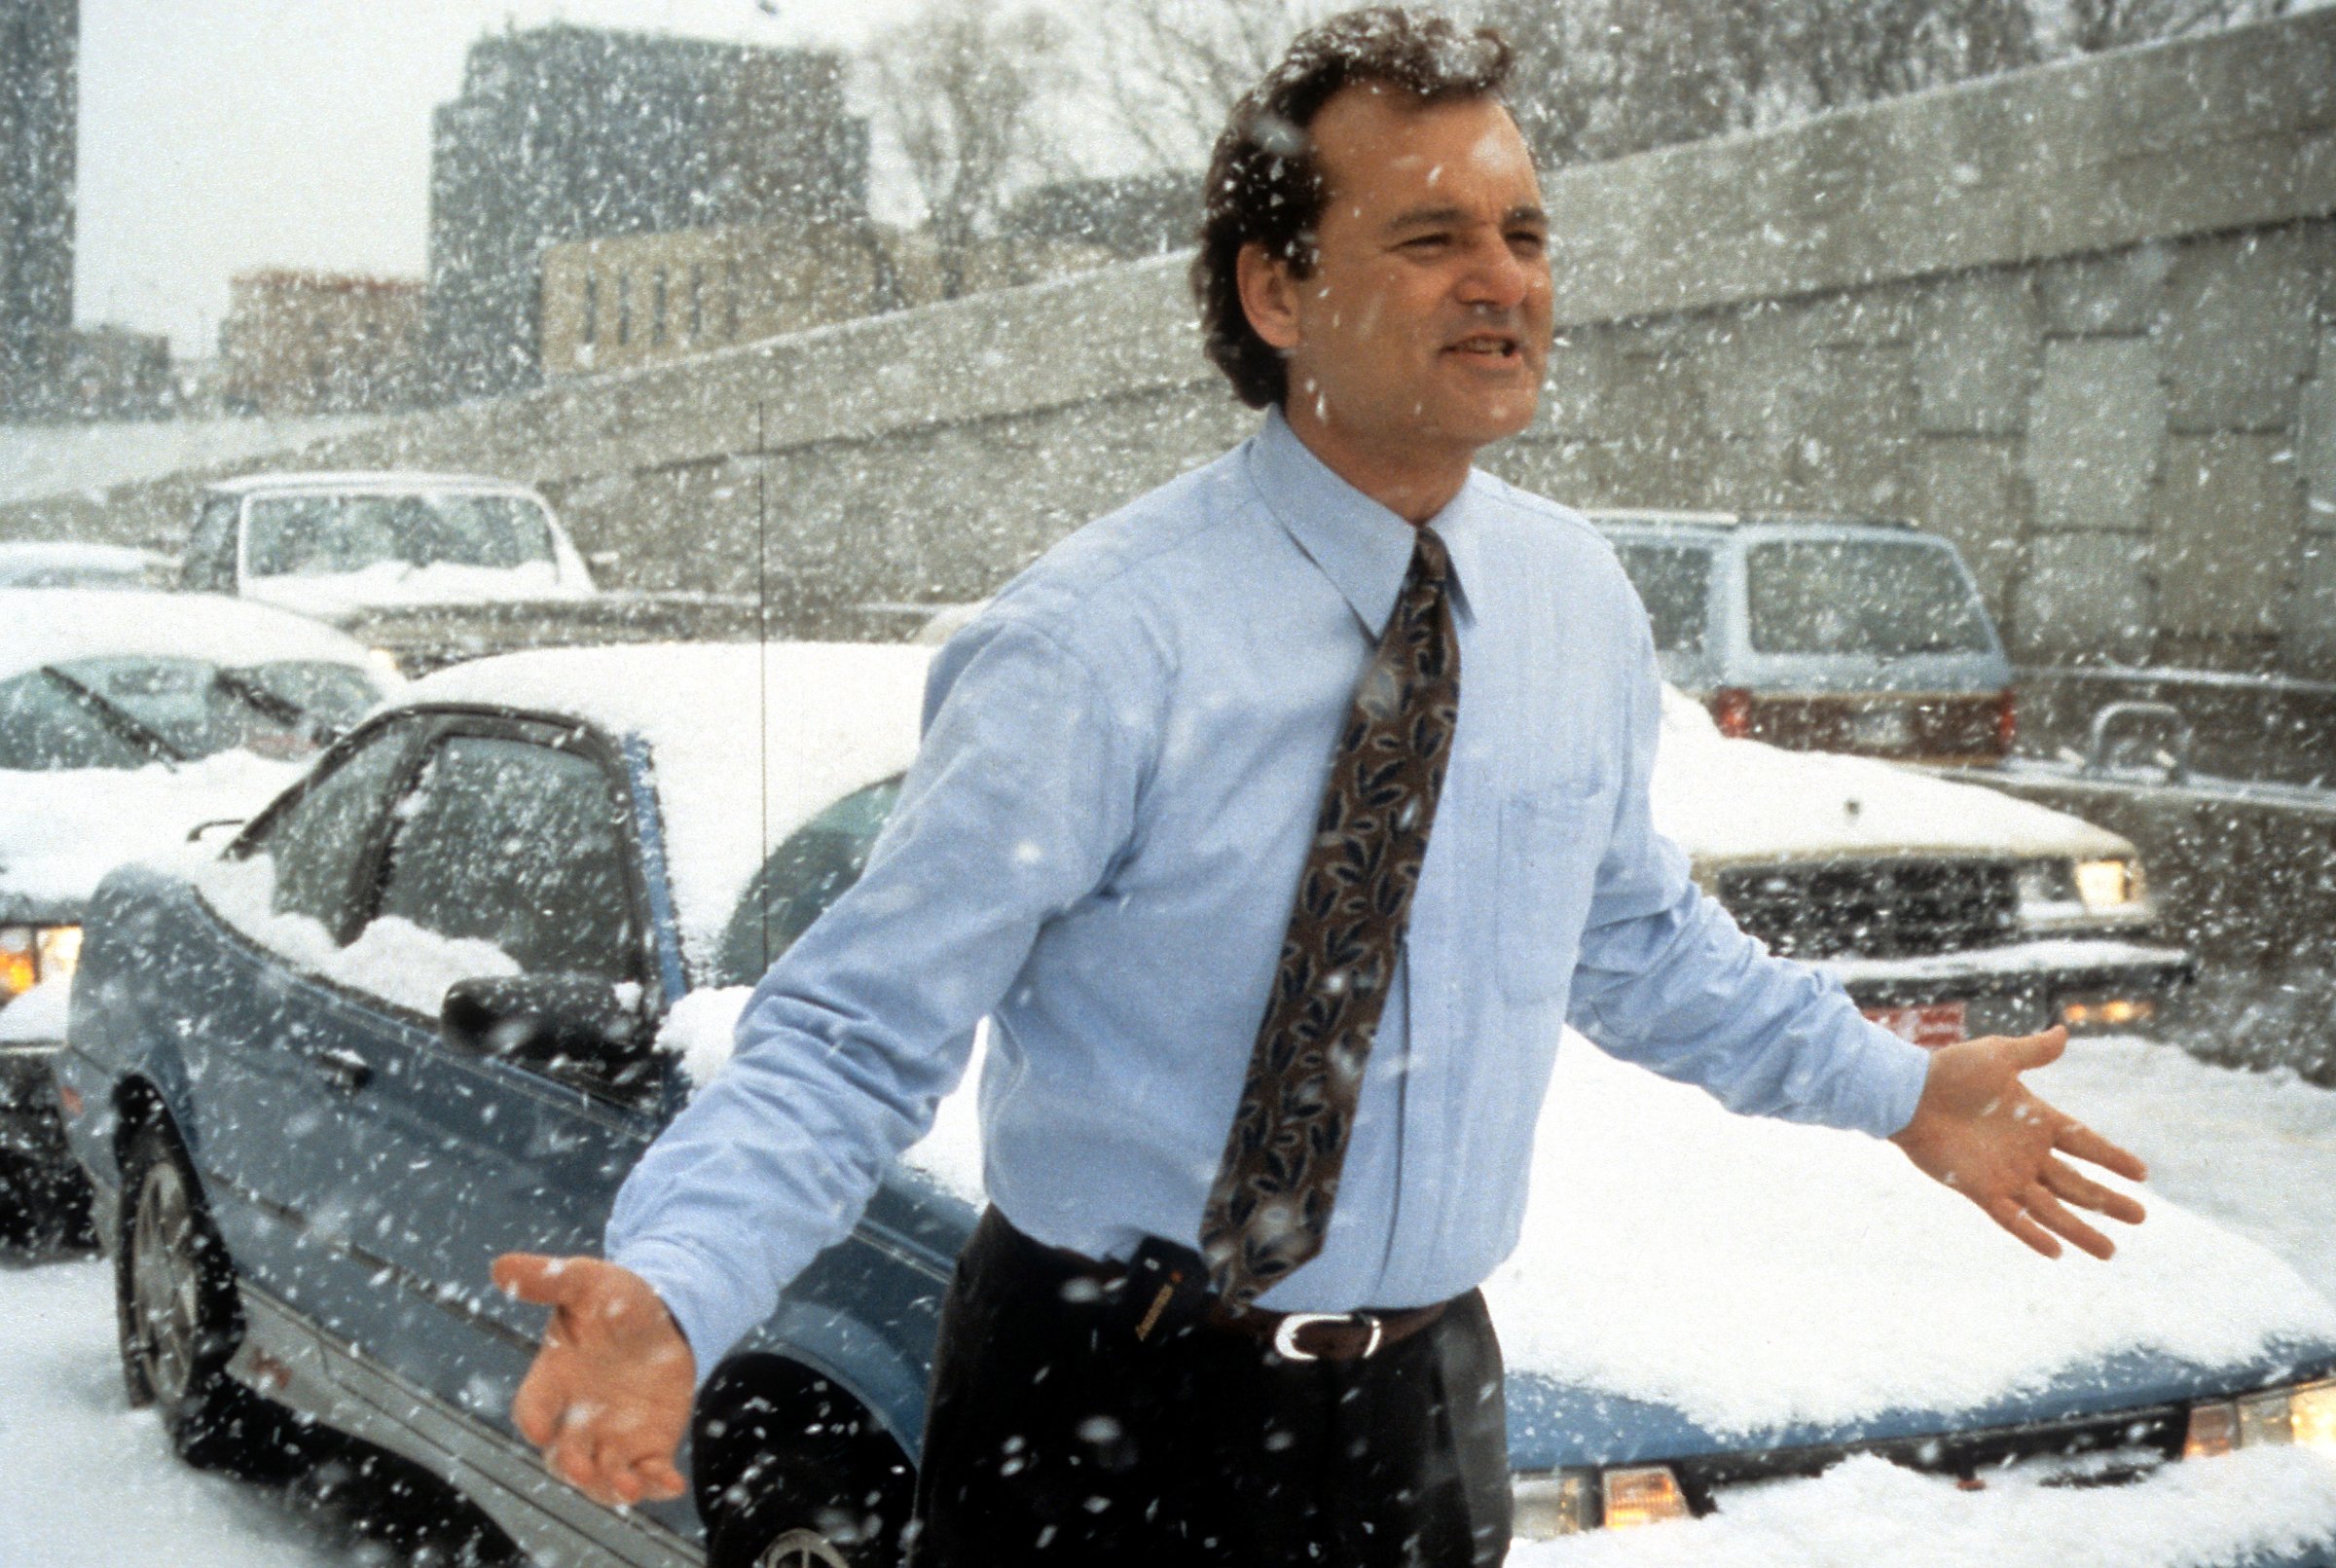 Bill Murray runs through the snow in a scene from the film Groundhog Day in 1993.